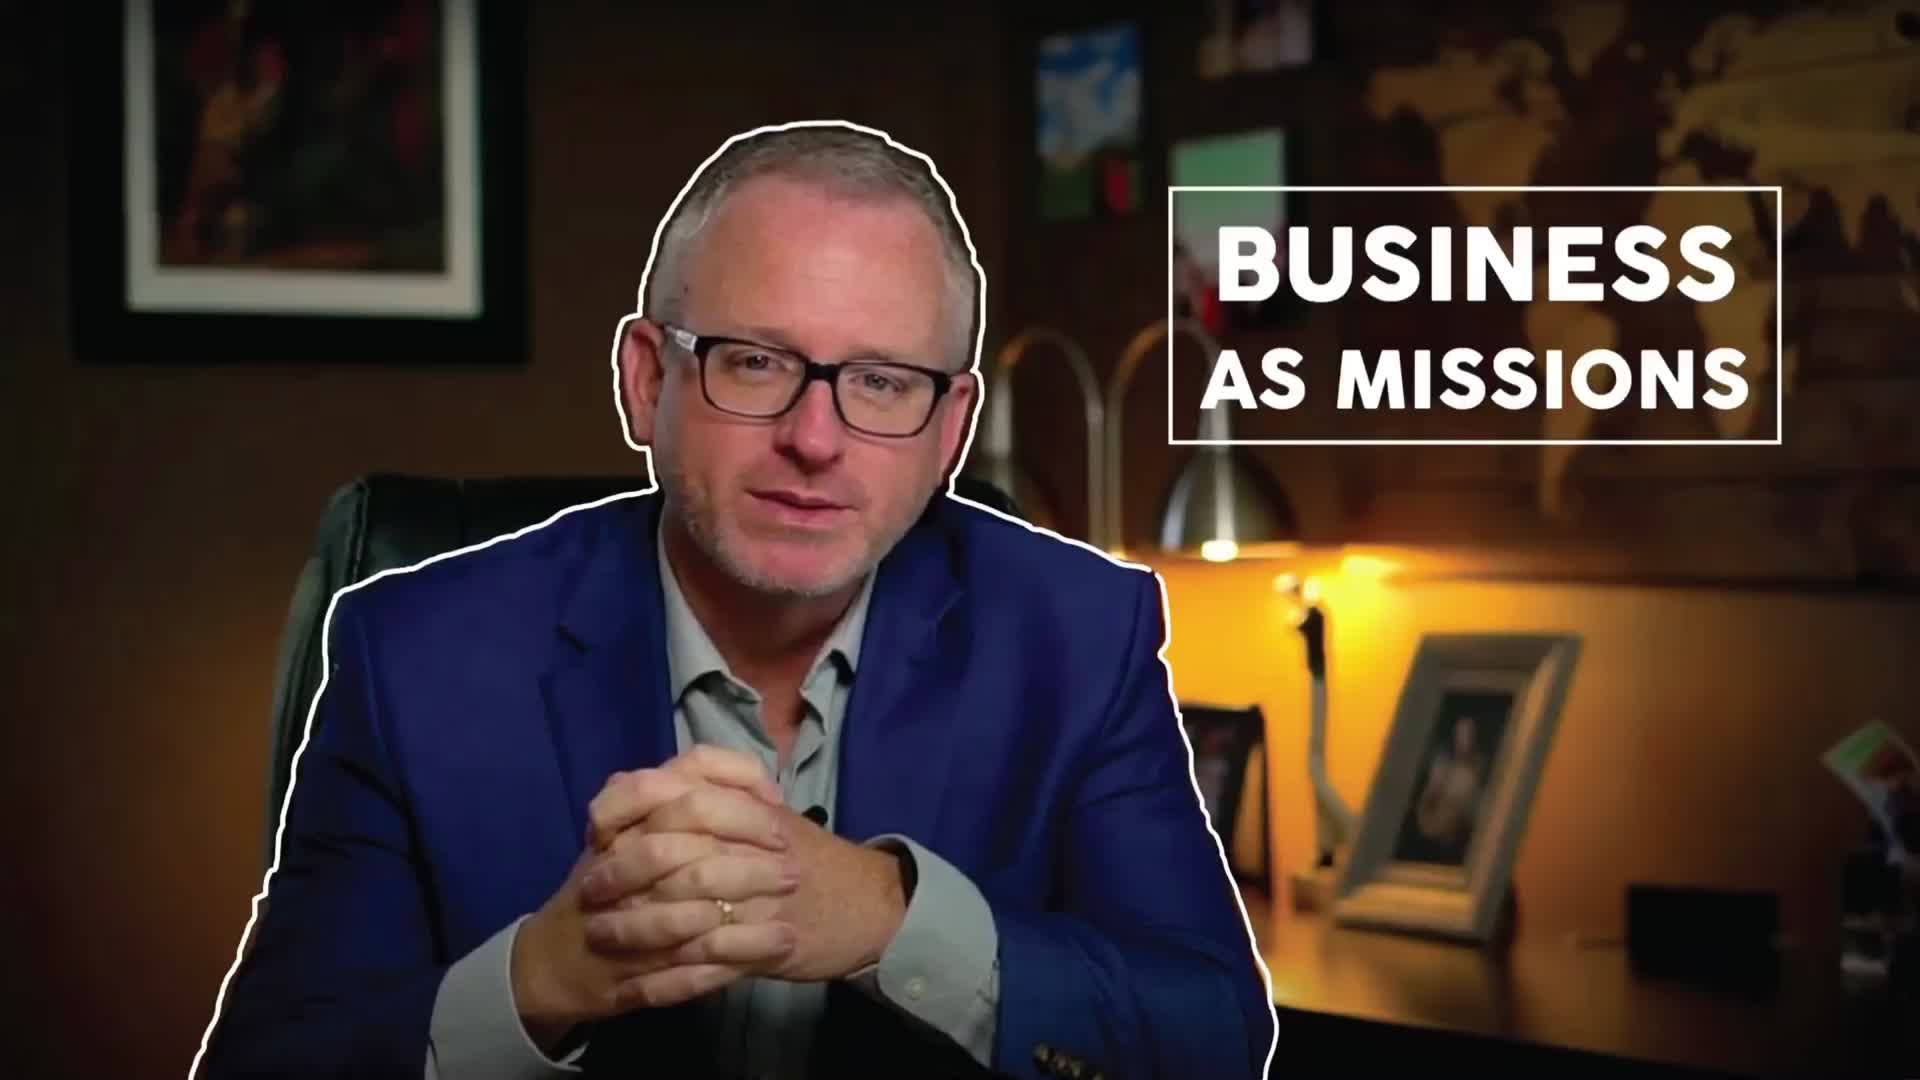 VIDEO: Business as Missions (BAM)